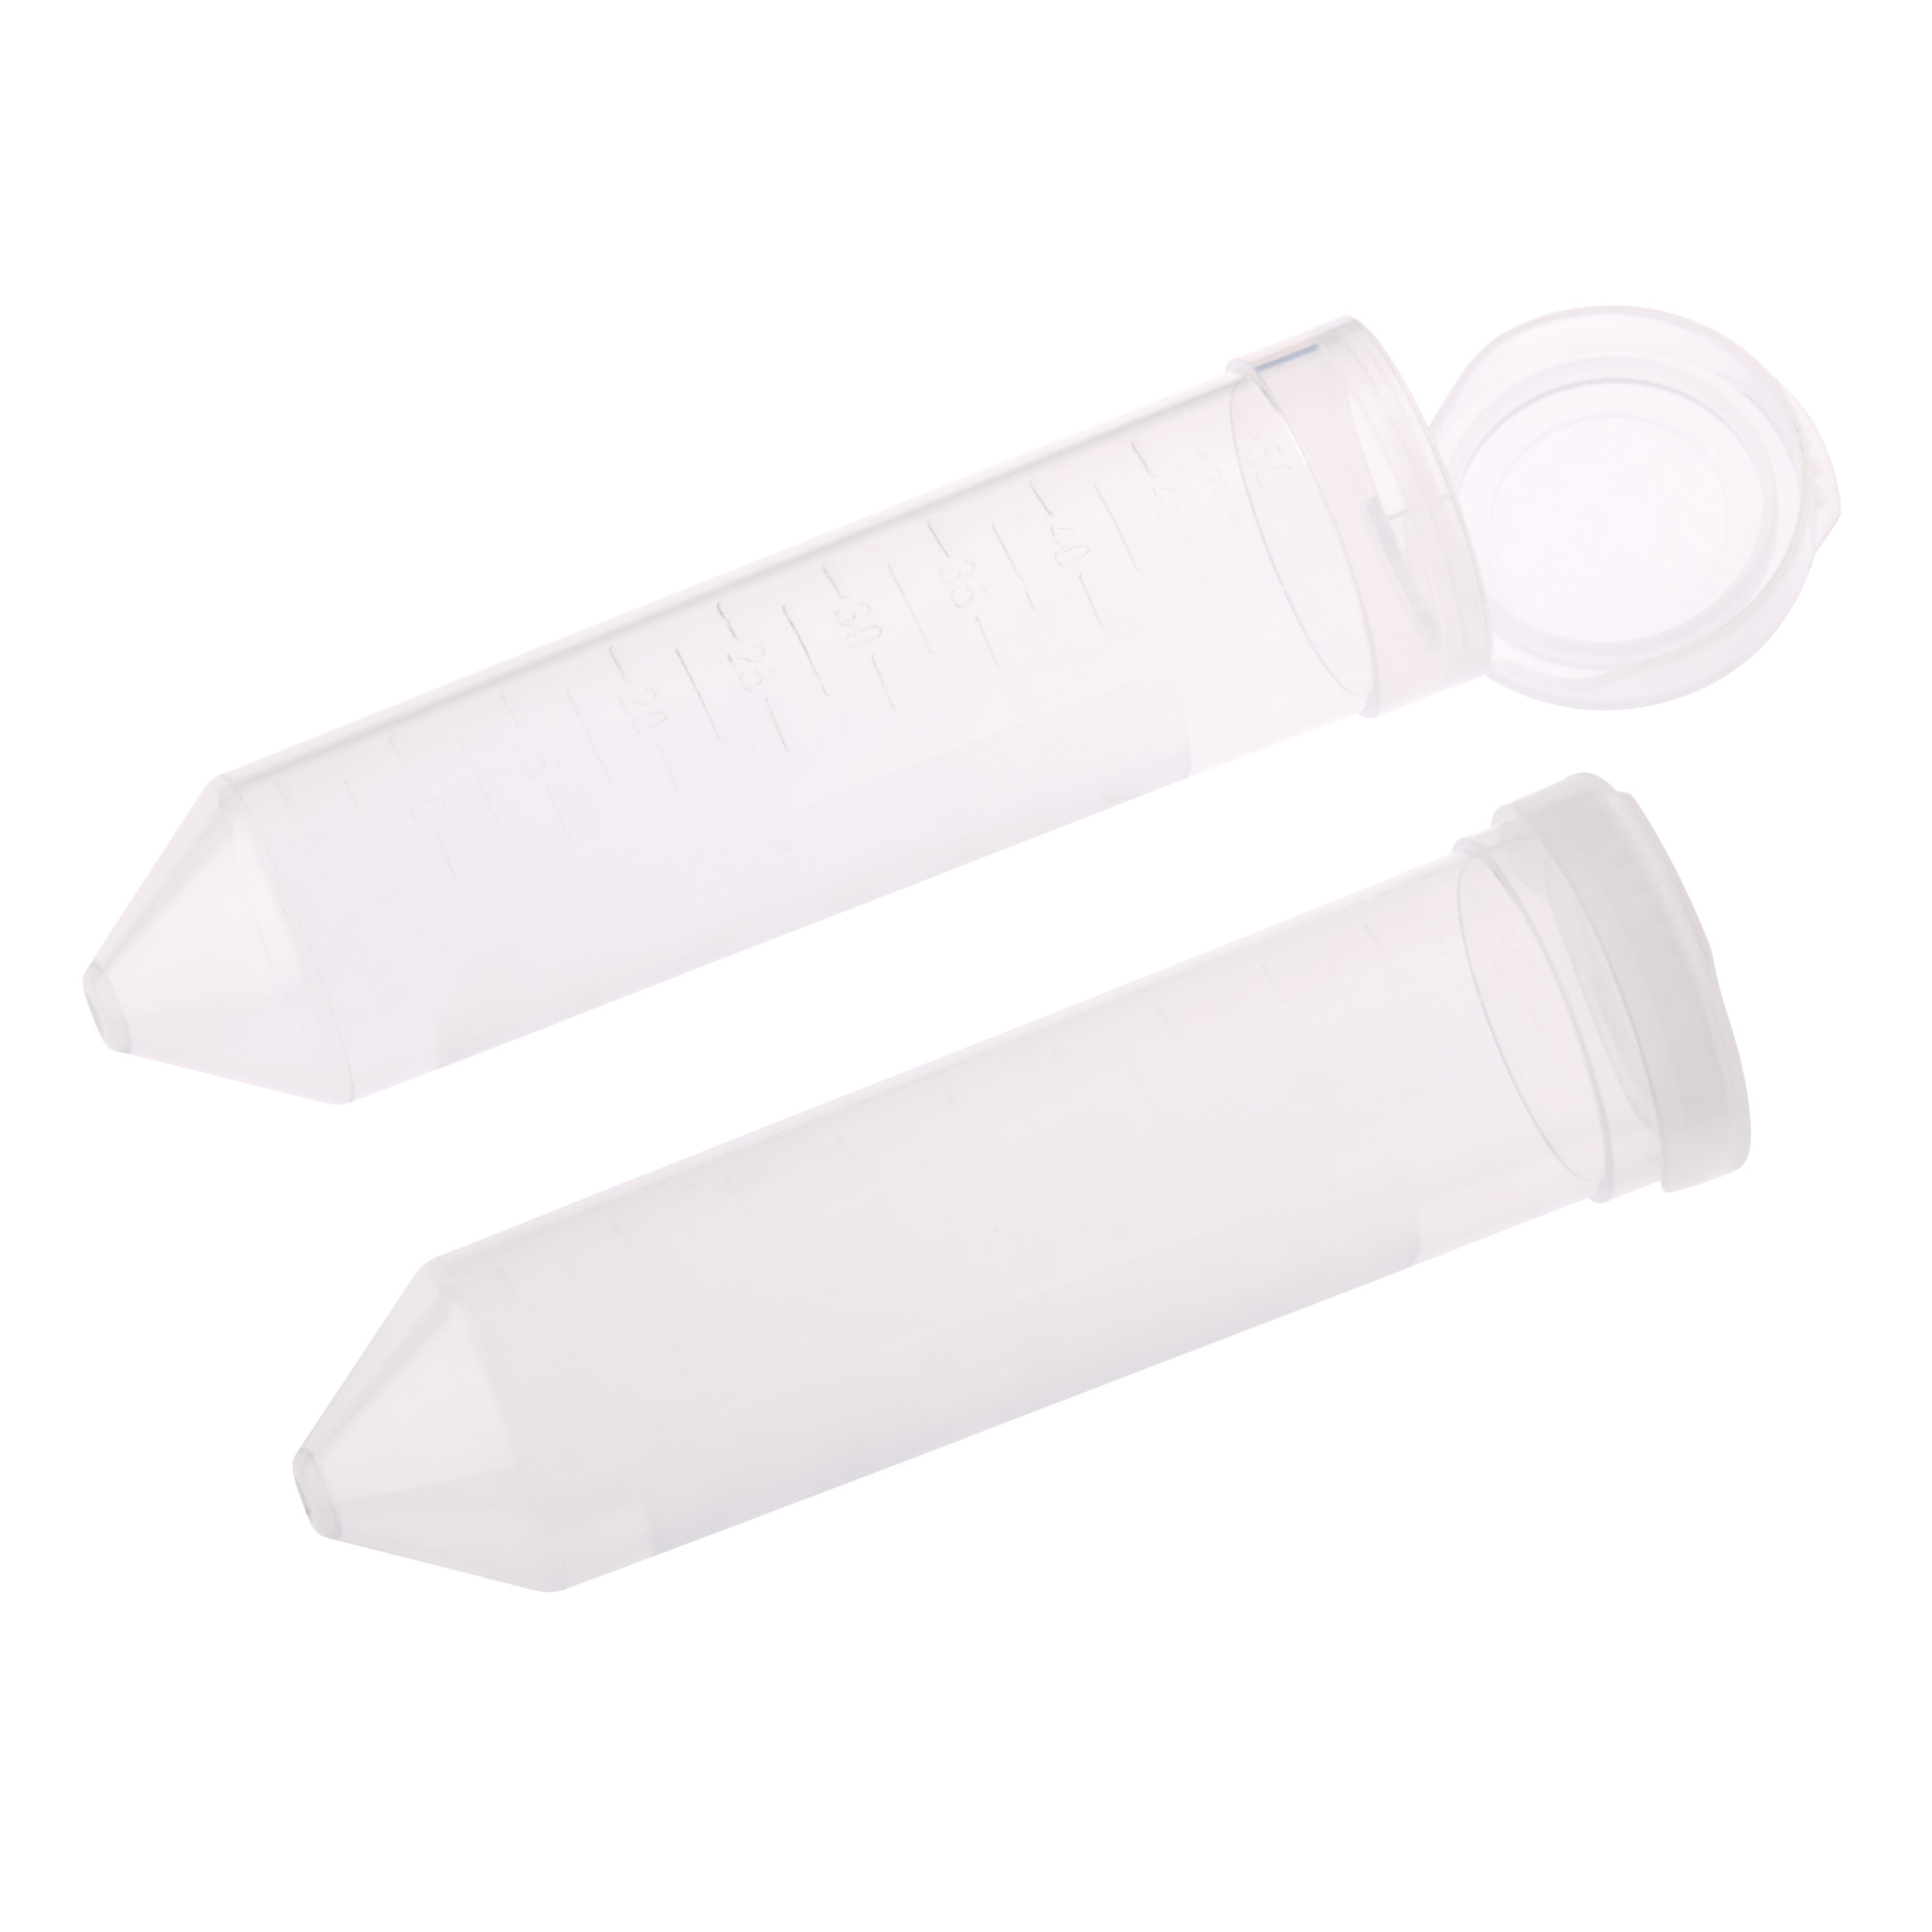 Snap-Pop Lid Centrifuge Tube 2 Packs of 500 pcs Celltreat Scientific Products 229498 